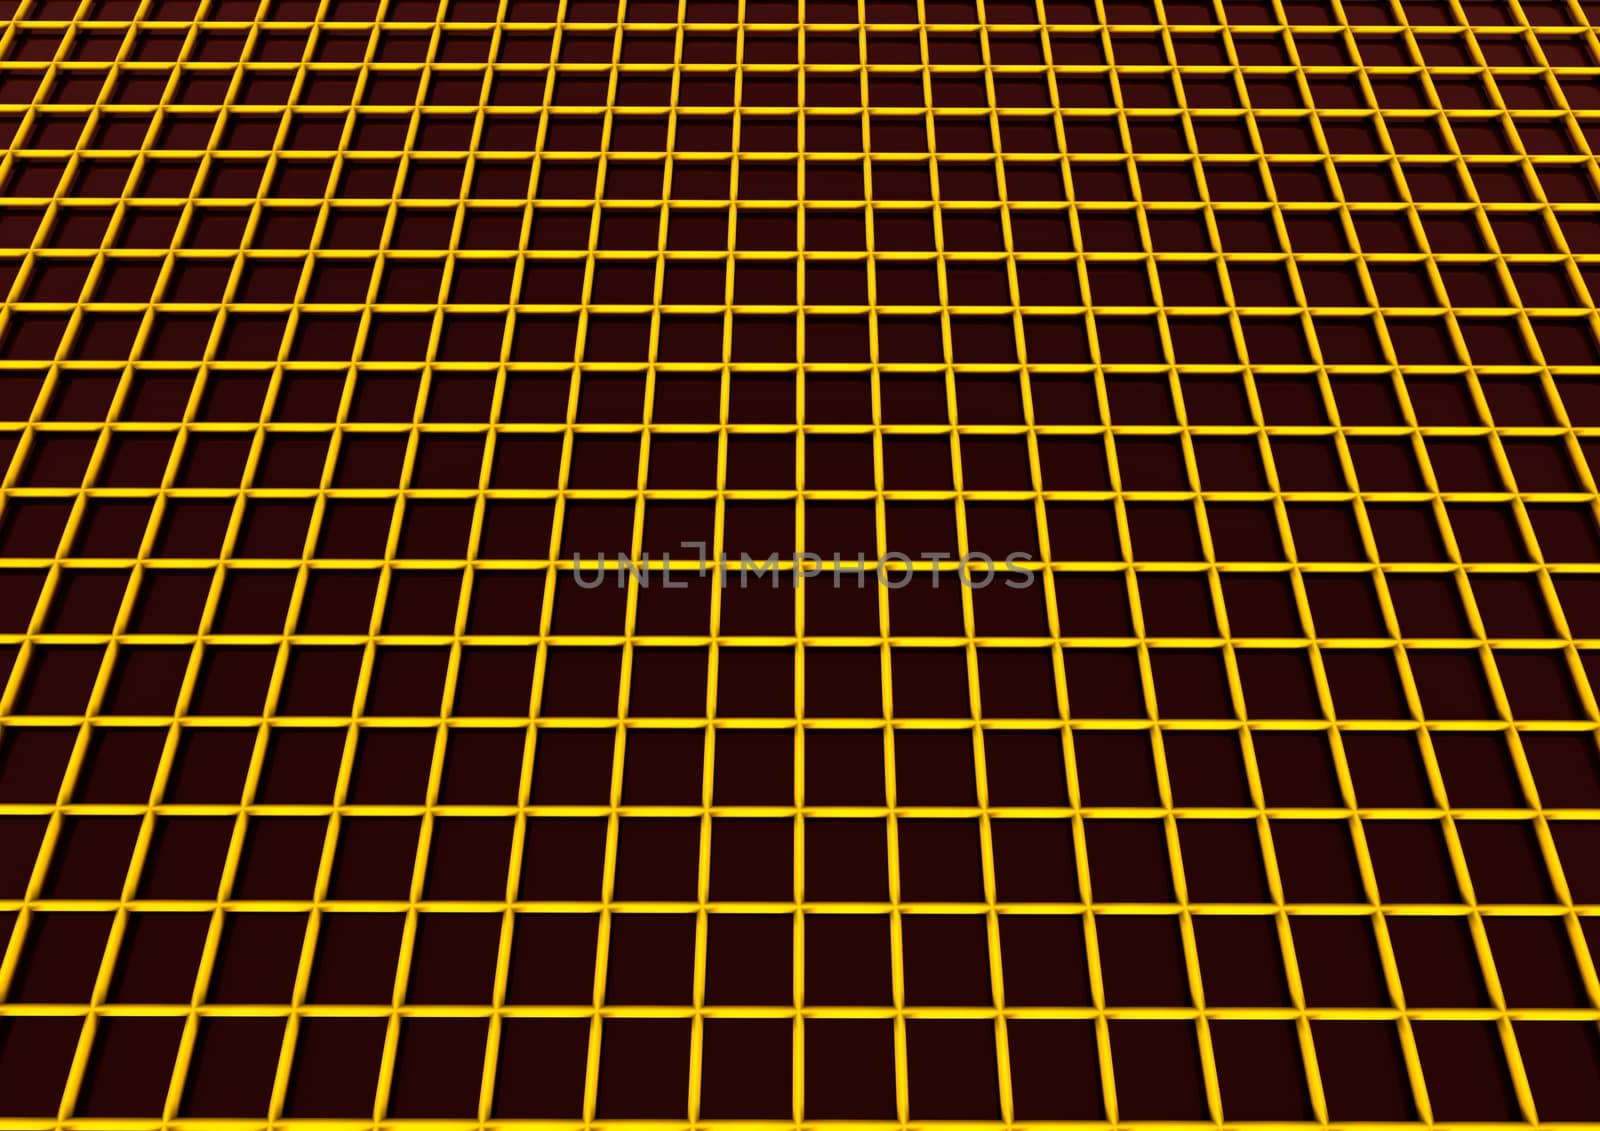 Abstract technology background with wired rectangle cells